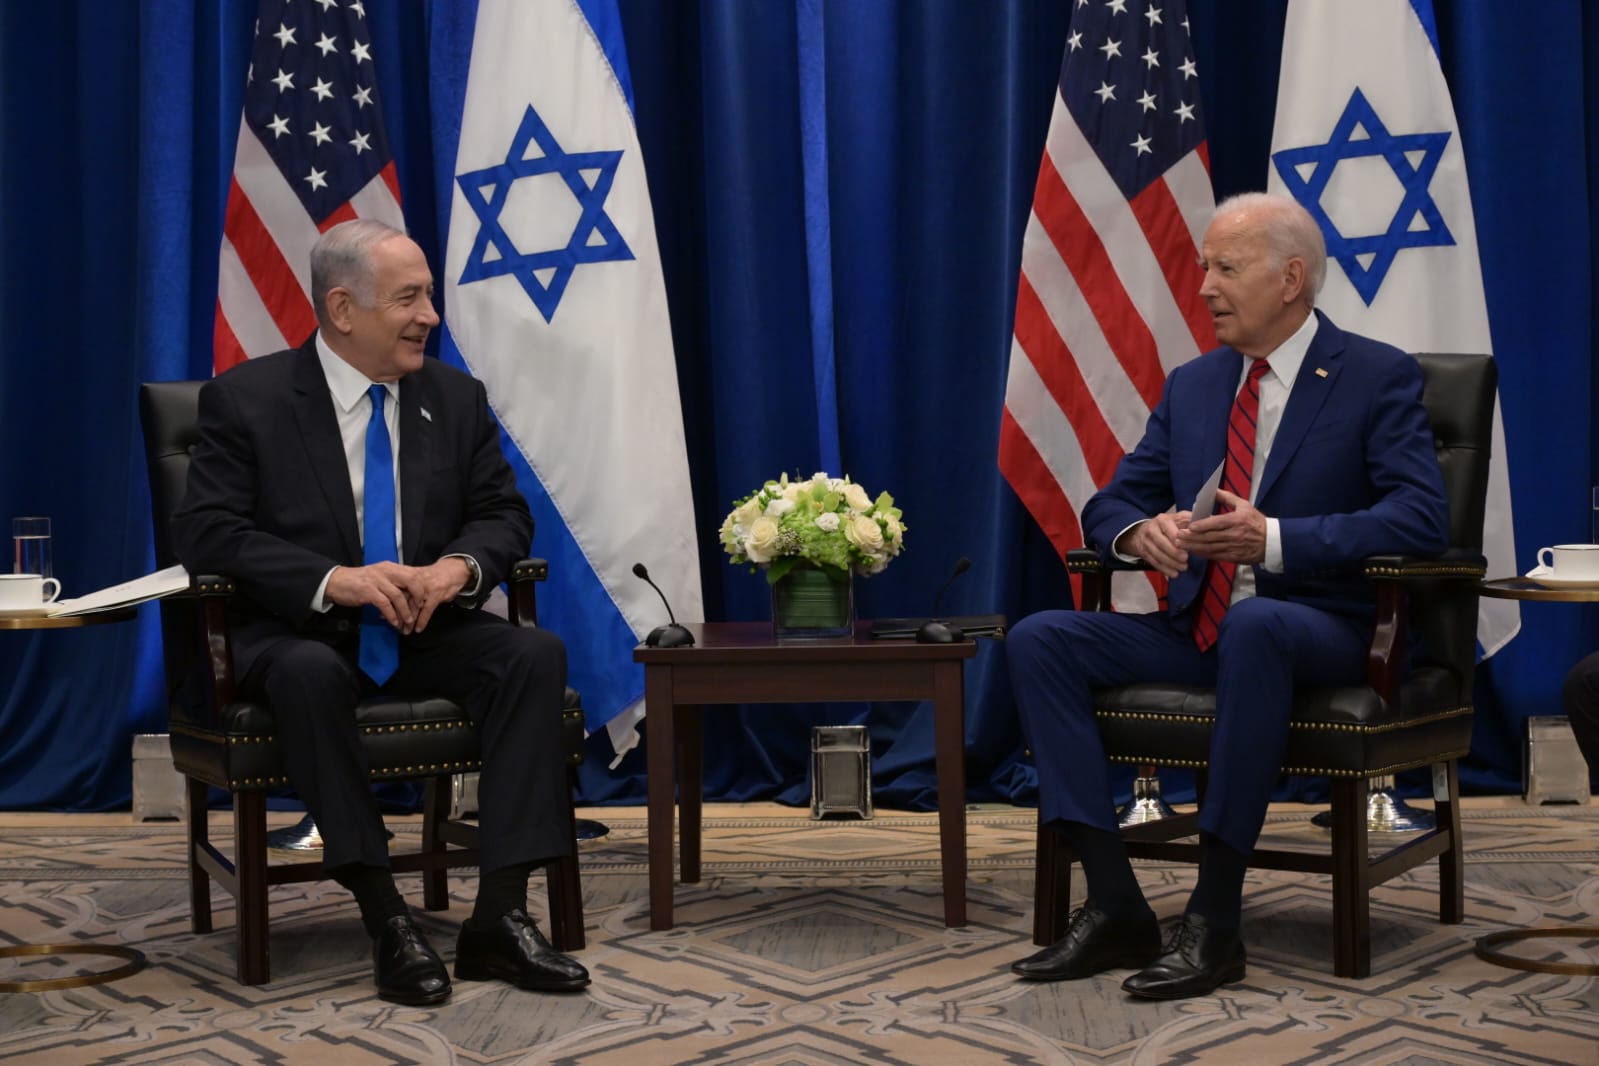 Biden: ‘My hope is that by next Monday we’ll have a ceasefire’